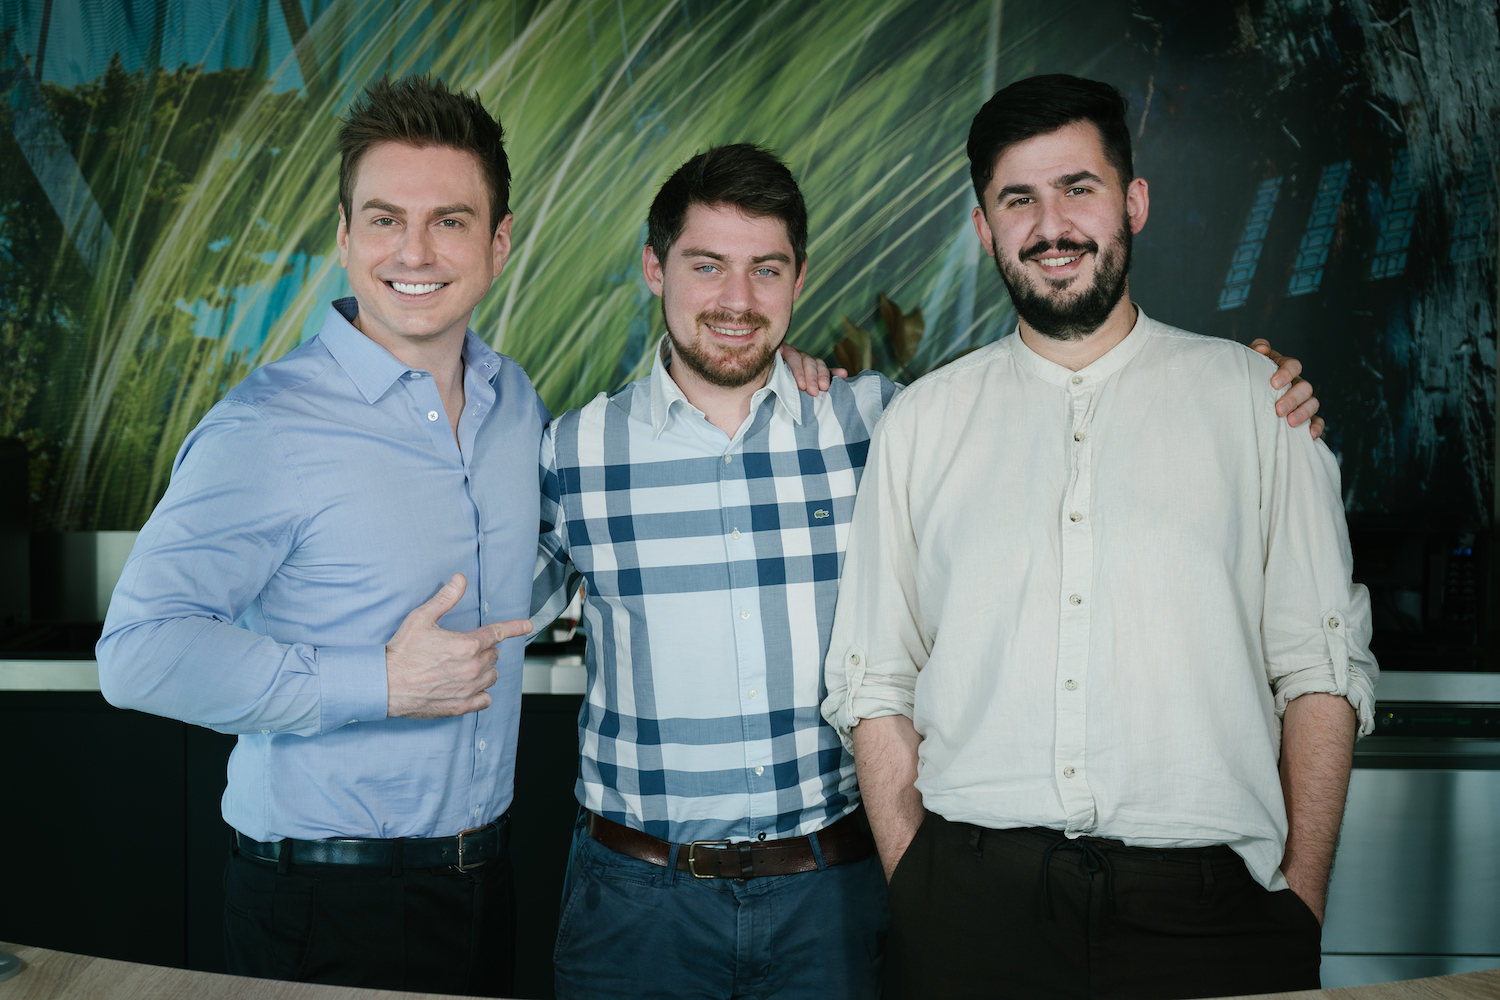 bonapp.eco, the app that offers 50-80% savings on food, expands to Brasov